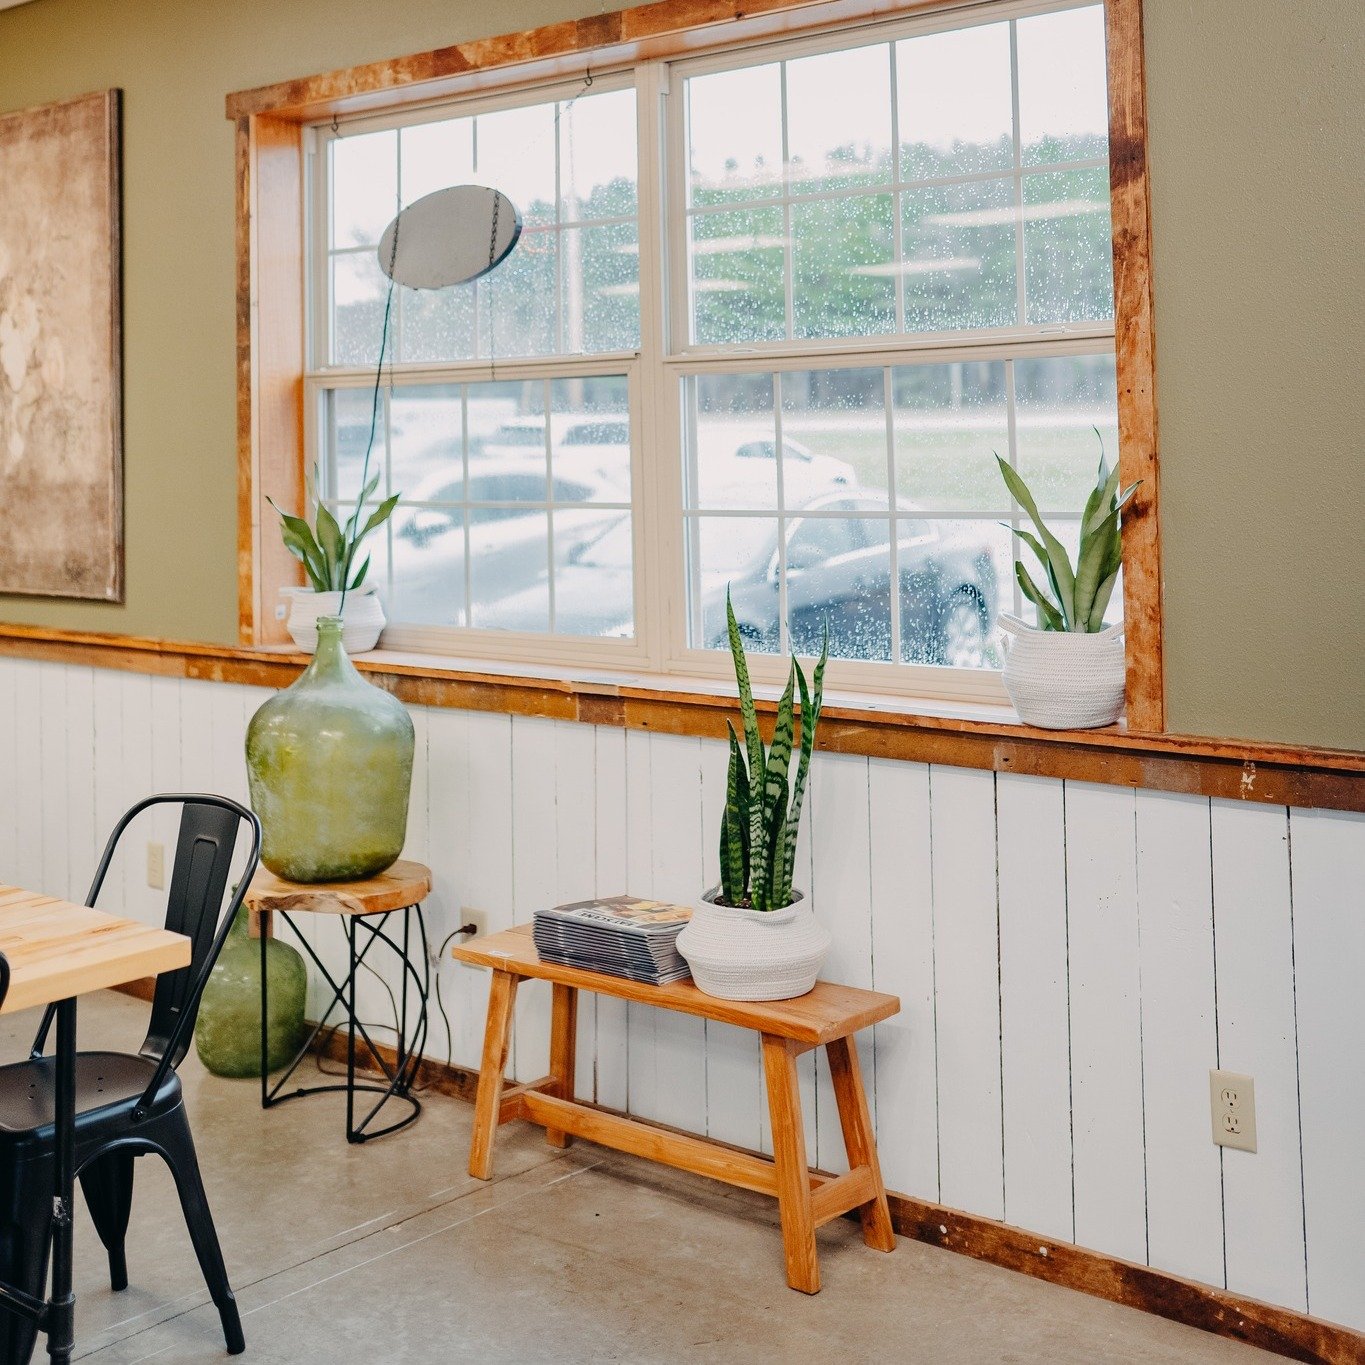 Open space, plants, the smell of coffee... does it get much better? 

all about the vibes at Five &amp; Two Cafe! 🥰

#downtoearthshops #fiveandtwocafe #cafe #eauclairecafe